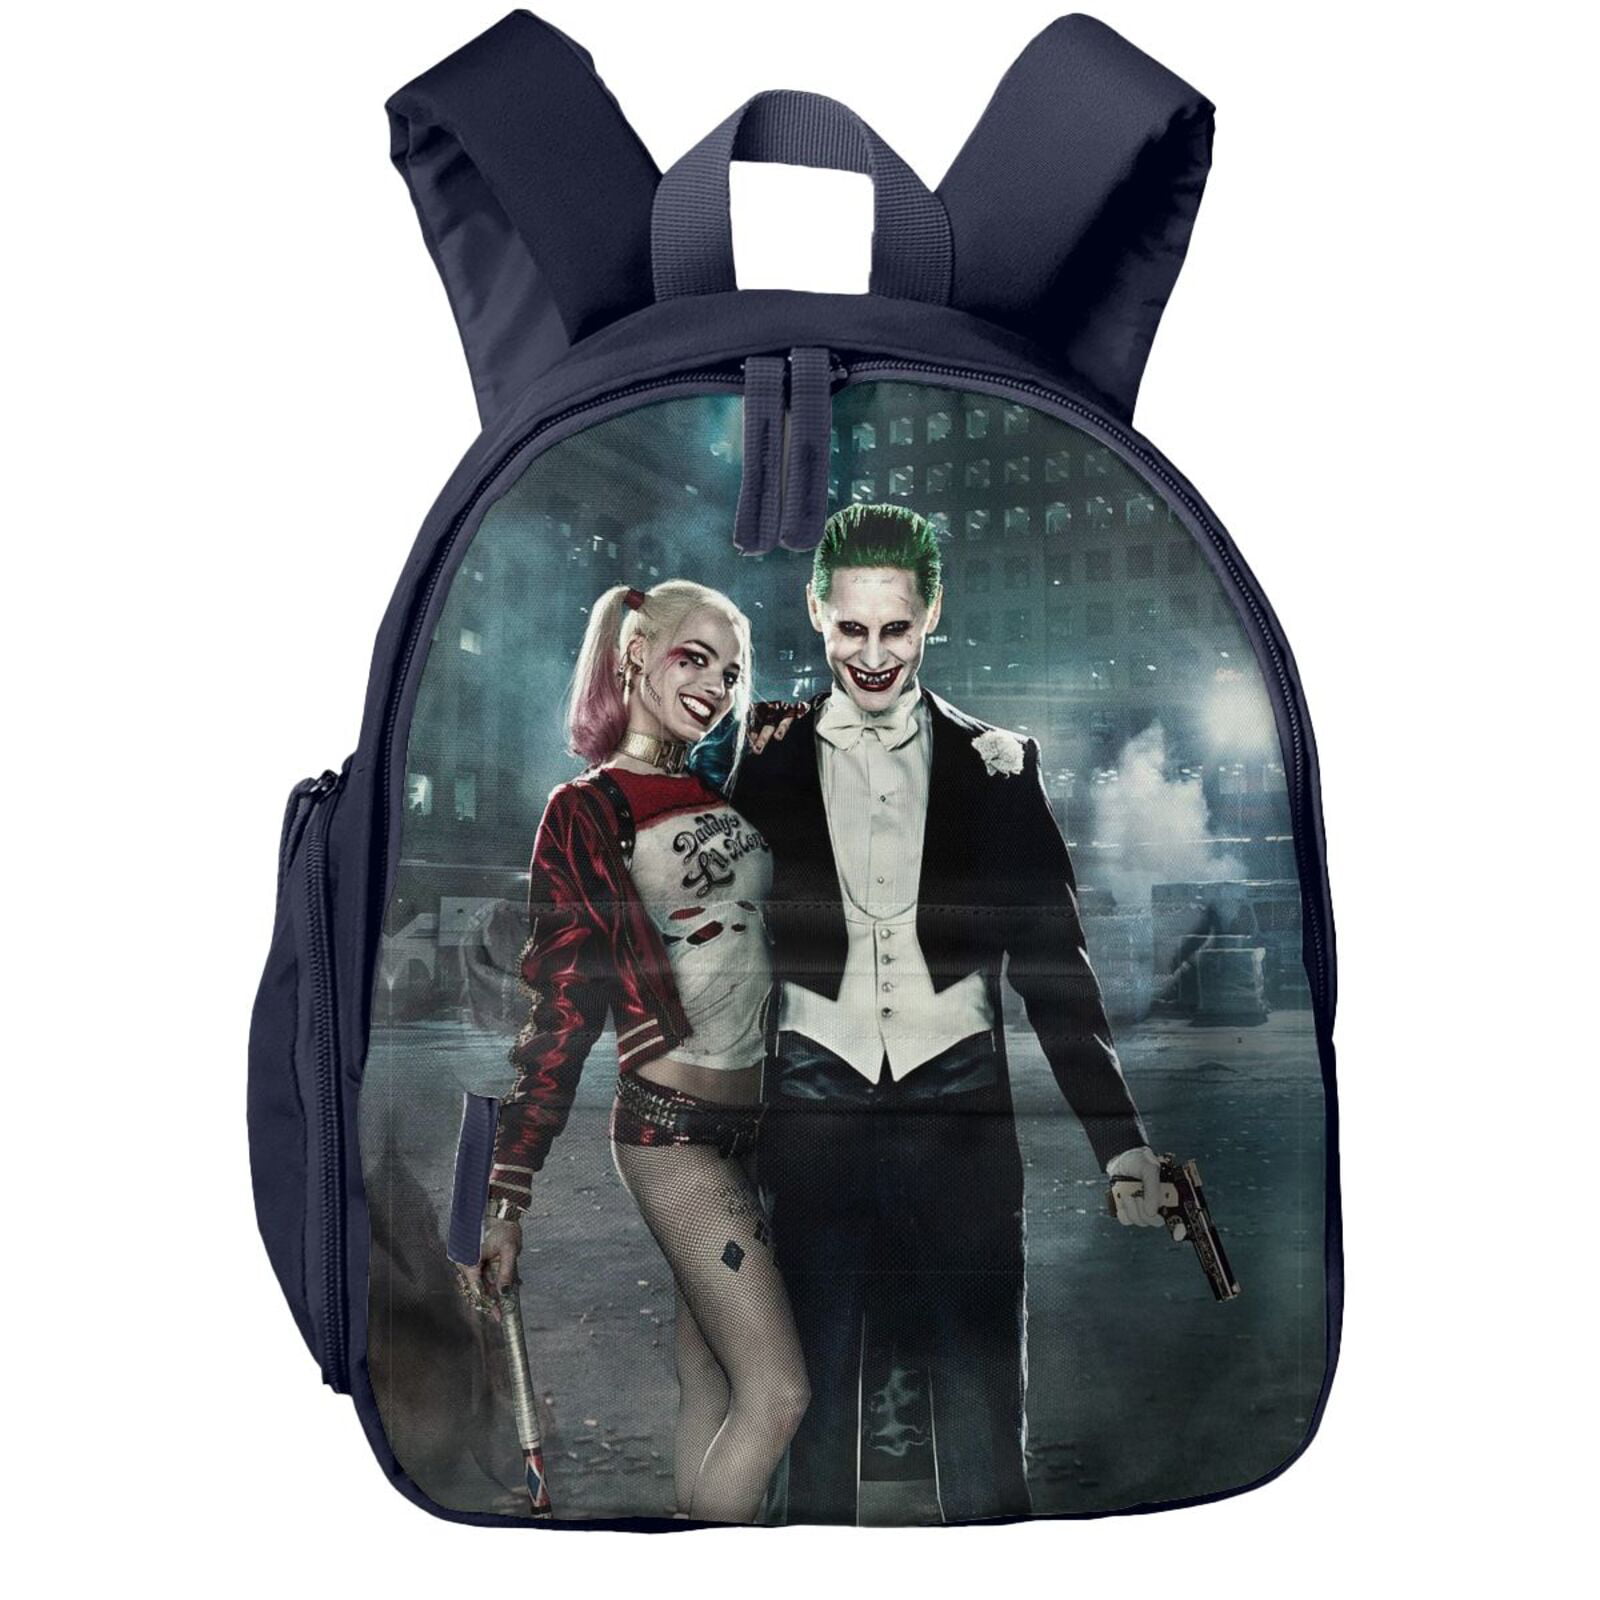 The Joker Backpack Knapsack Travel PU Leather Student Bags DC Cosplay Gifts New 